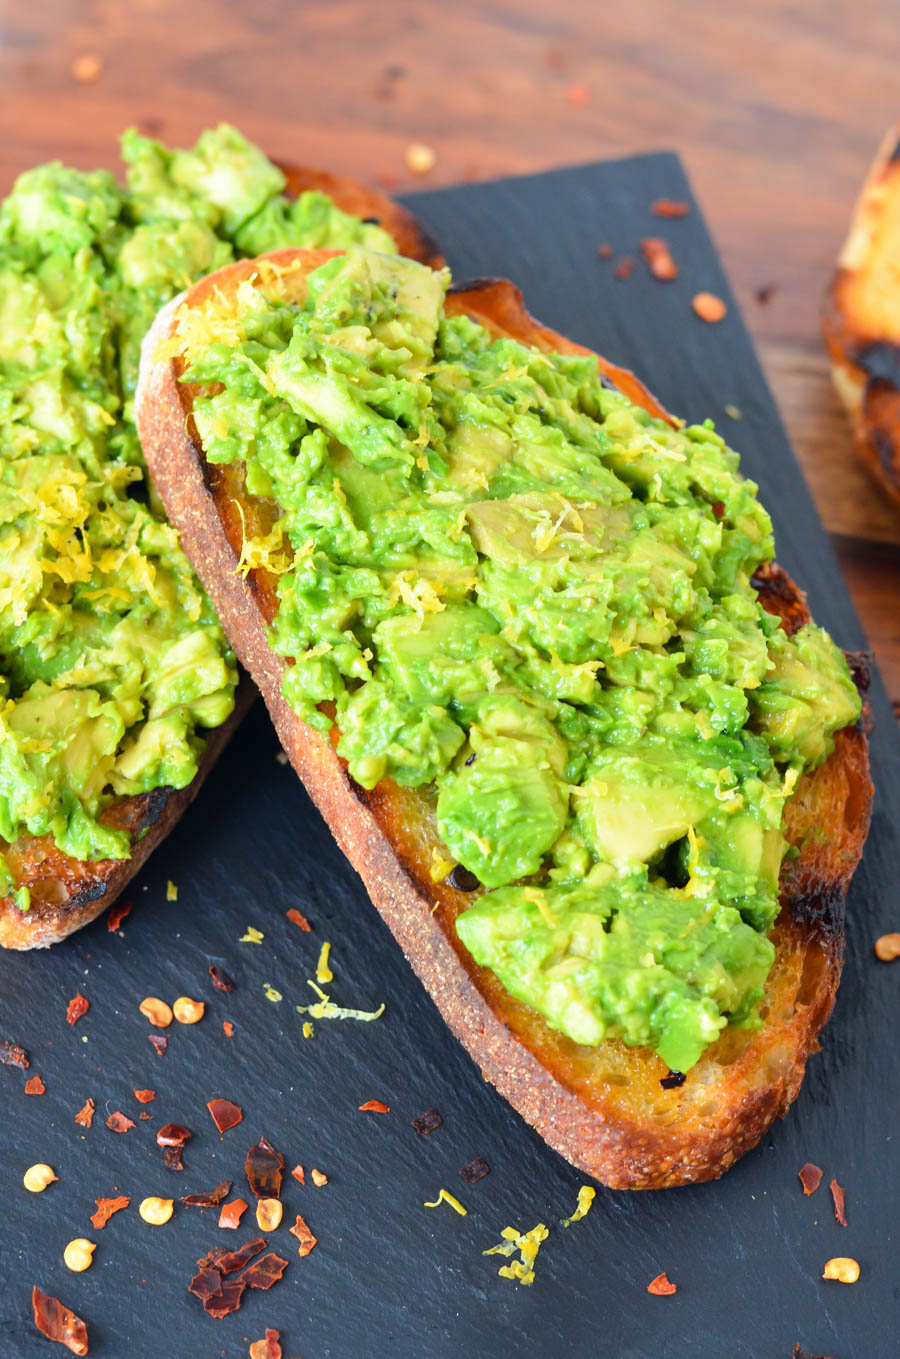 BBQ Grilled Avocado Toast - Avocado on Spicy Grilled Bread